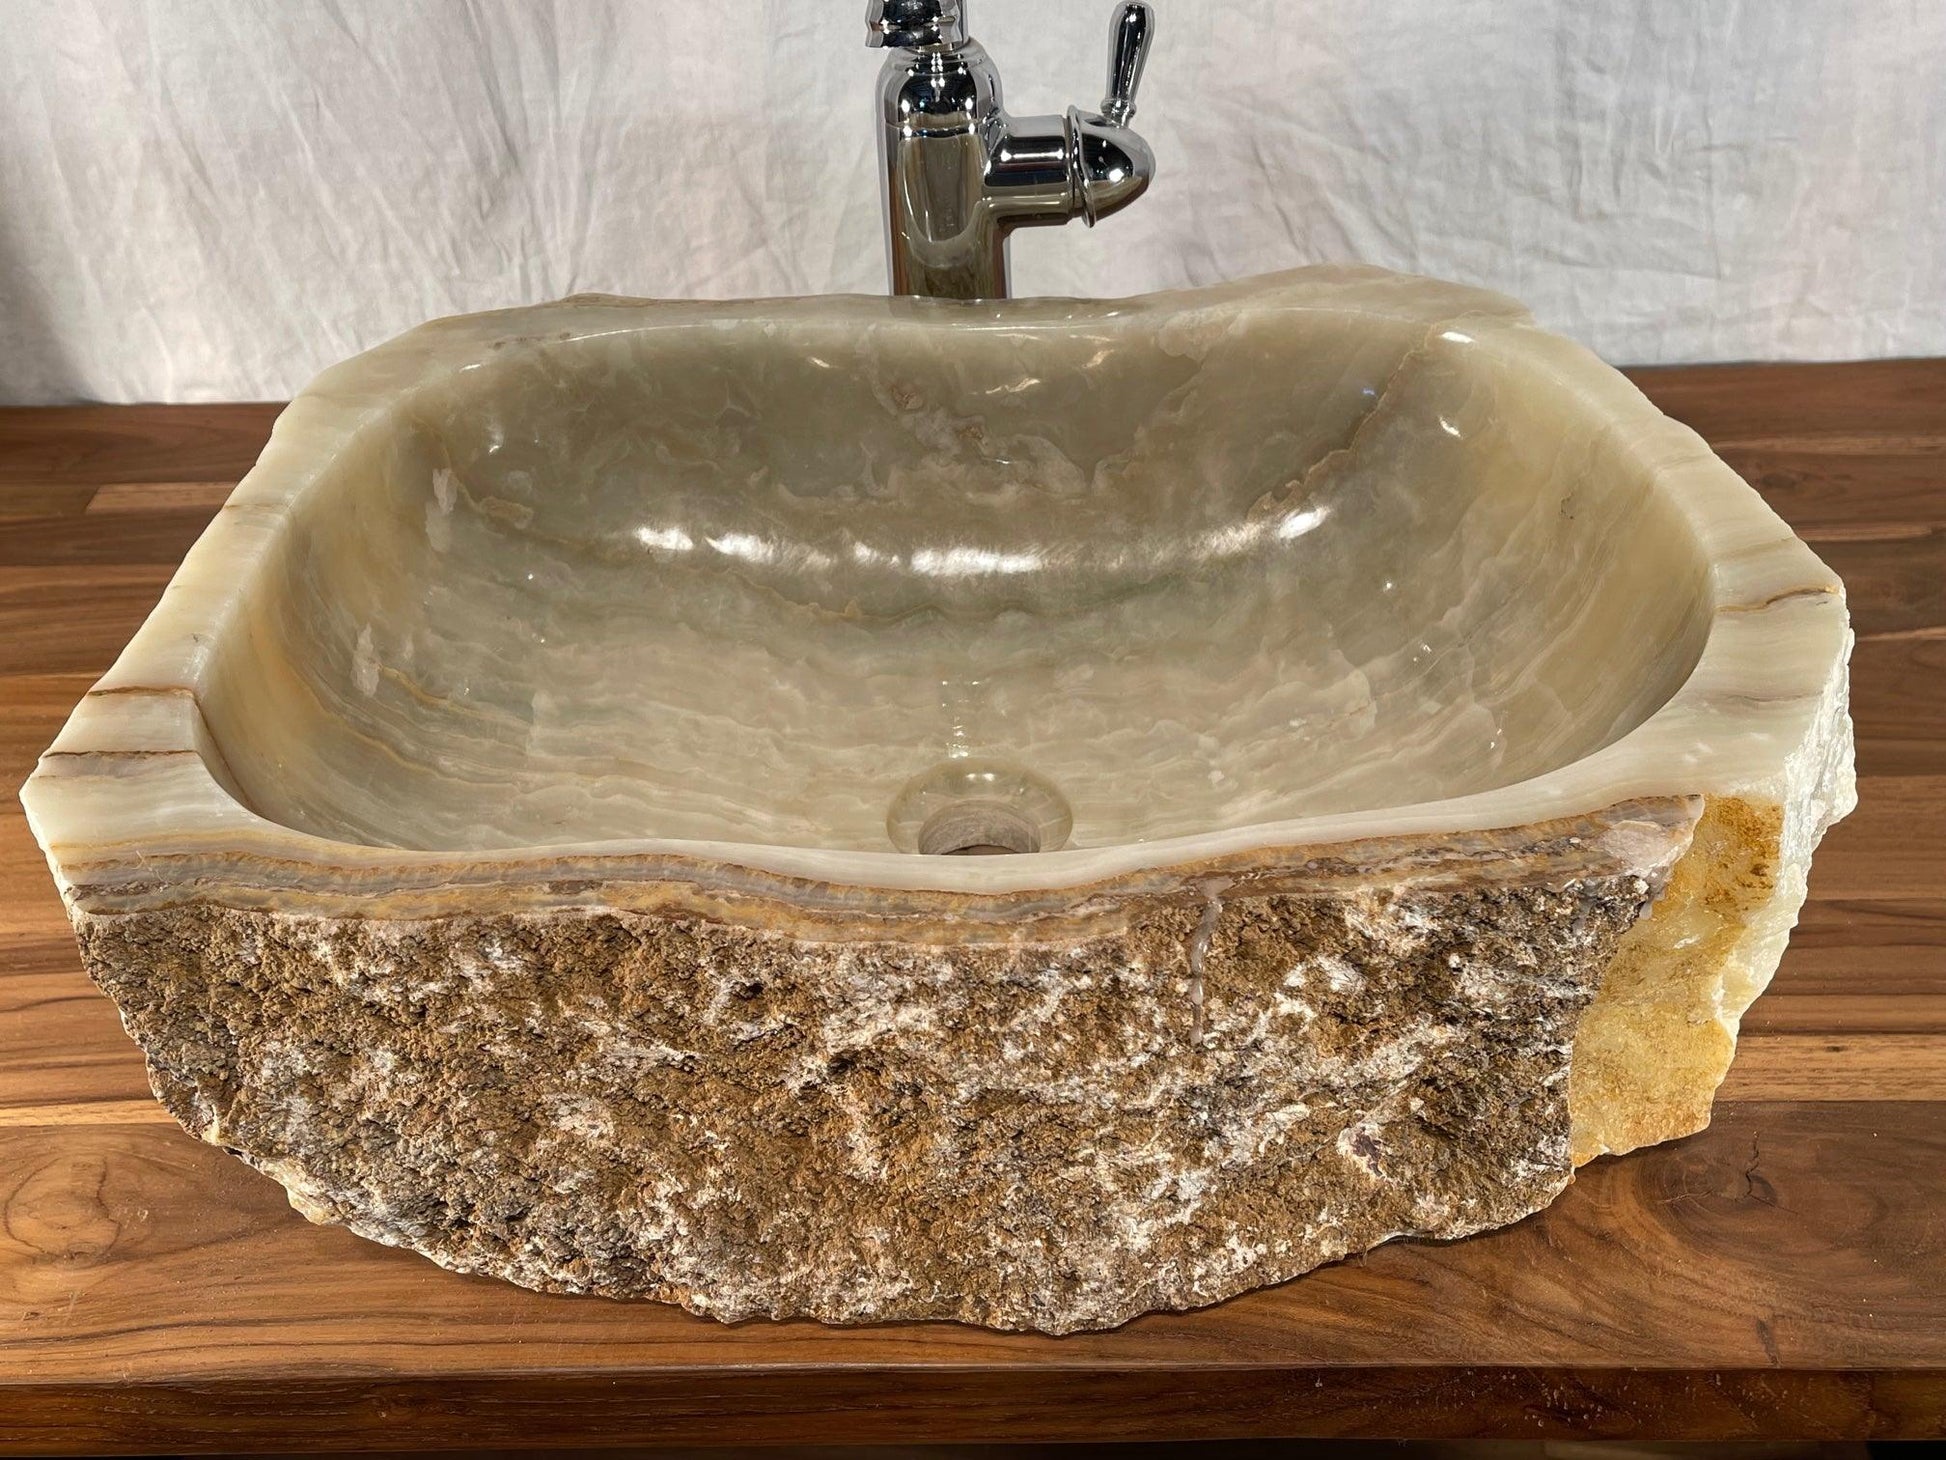 Unique Mixed Onyx With Gold Natural Stone Vessel Sink, OWG03 - Impact Imports